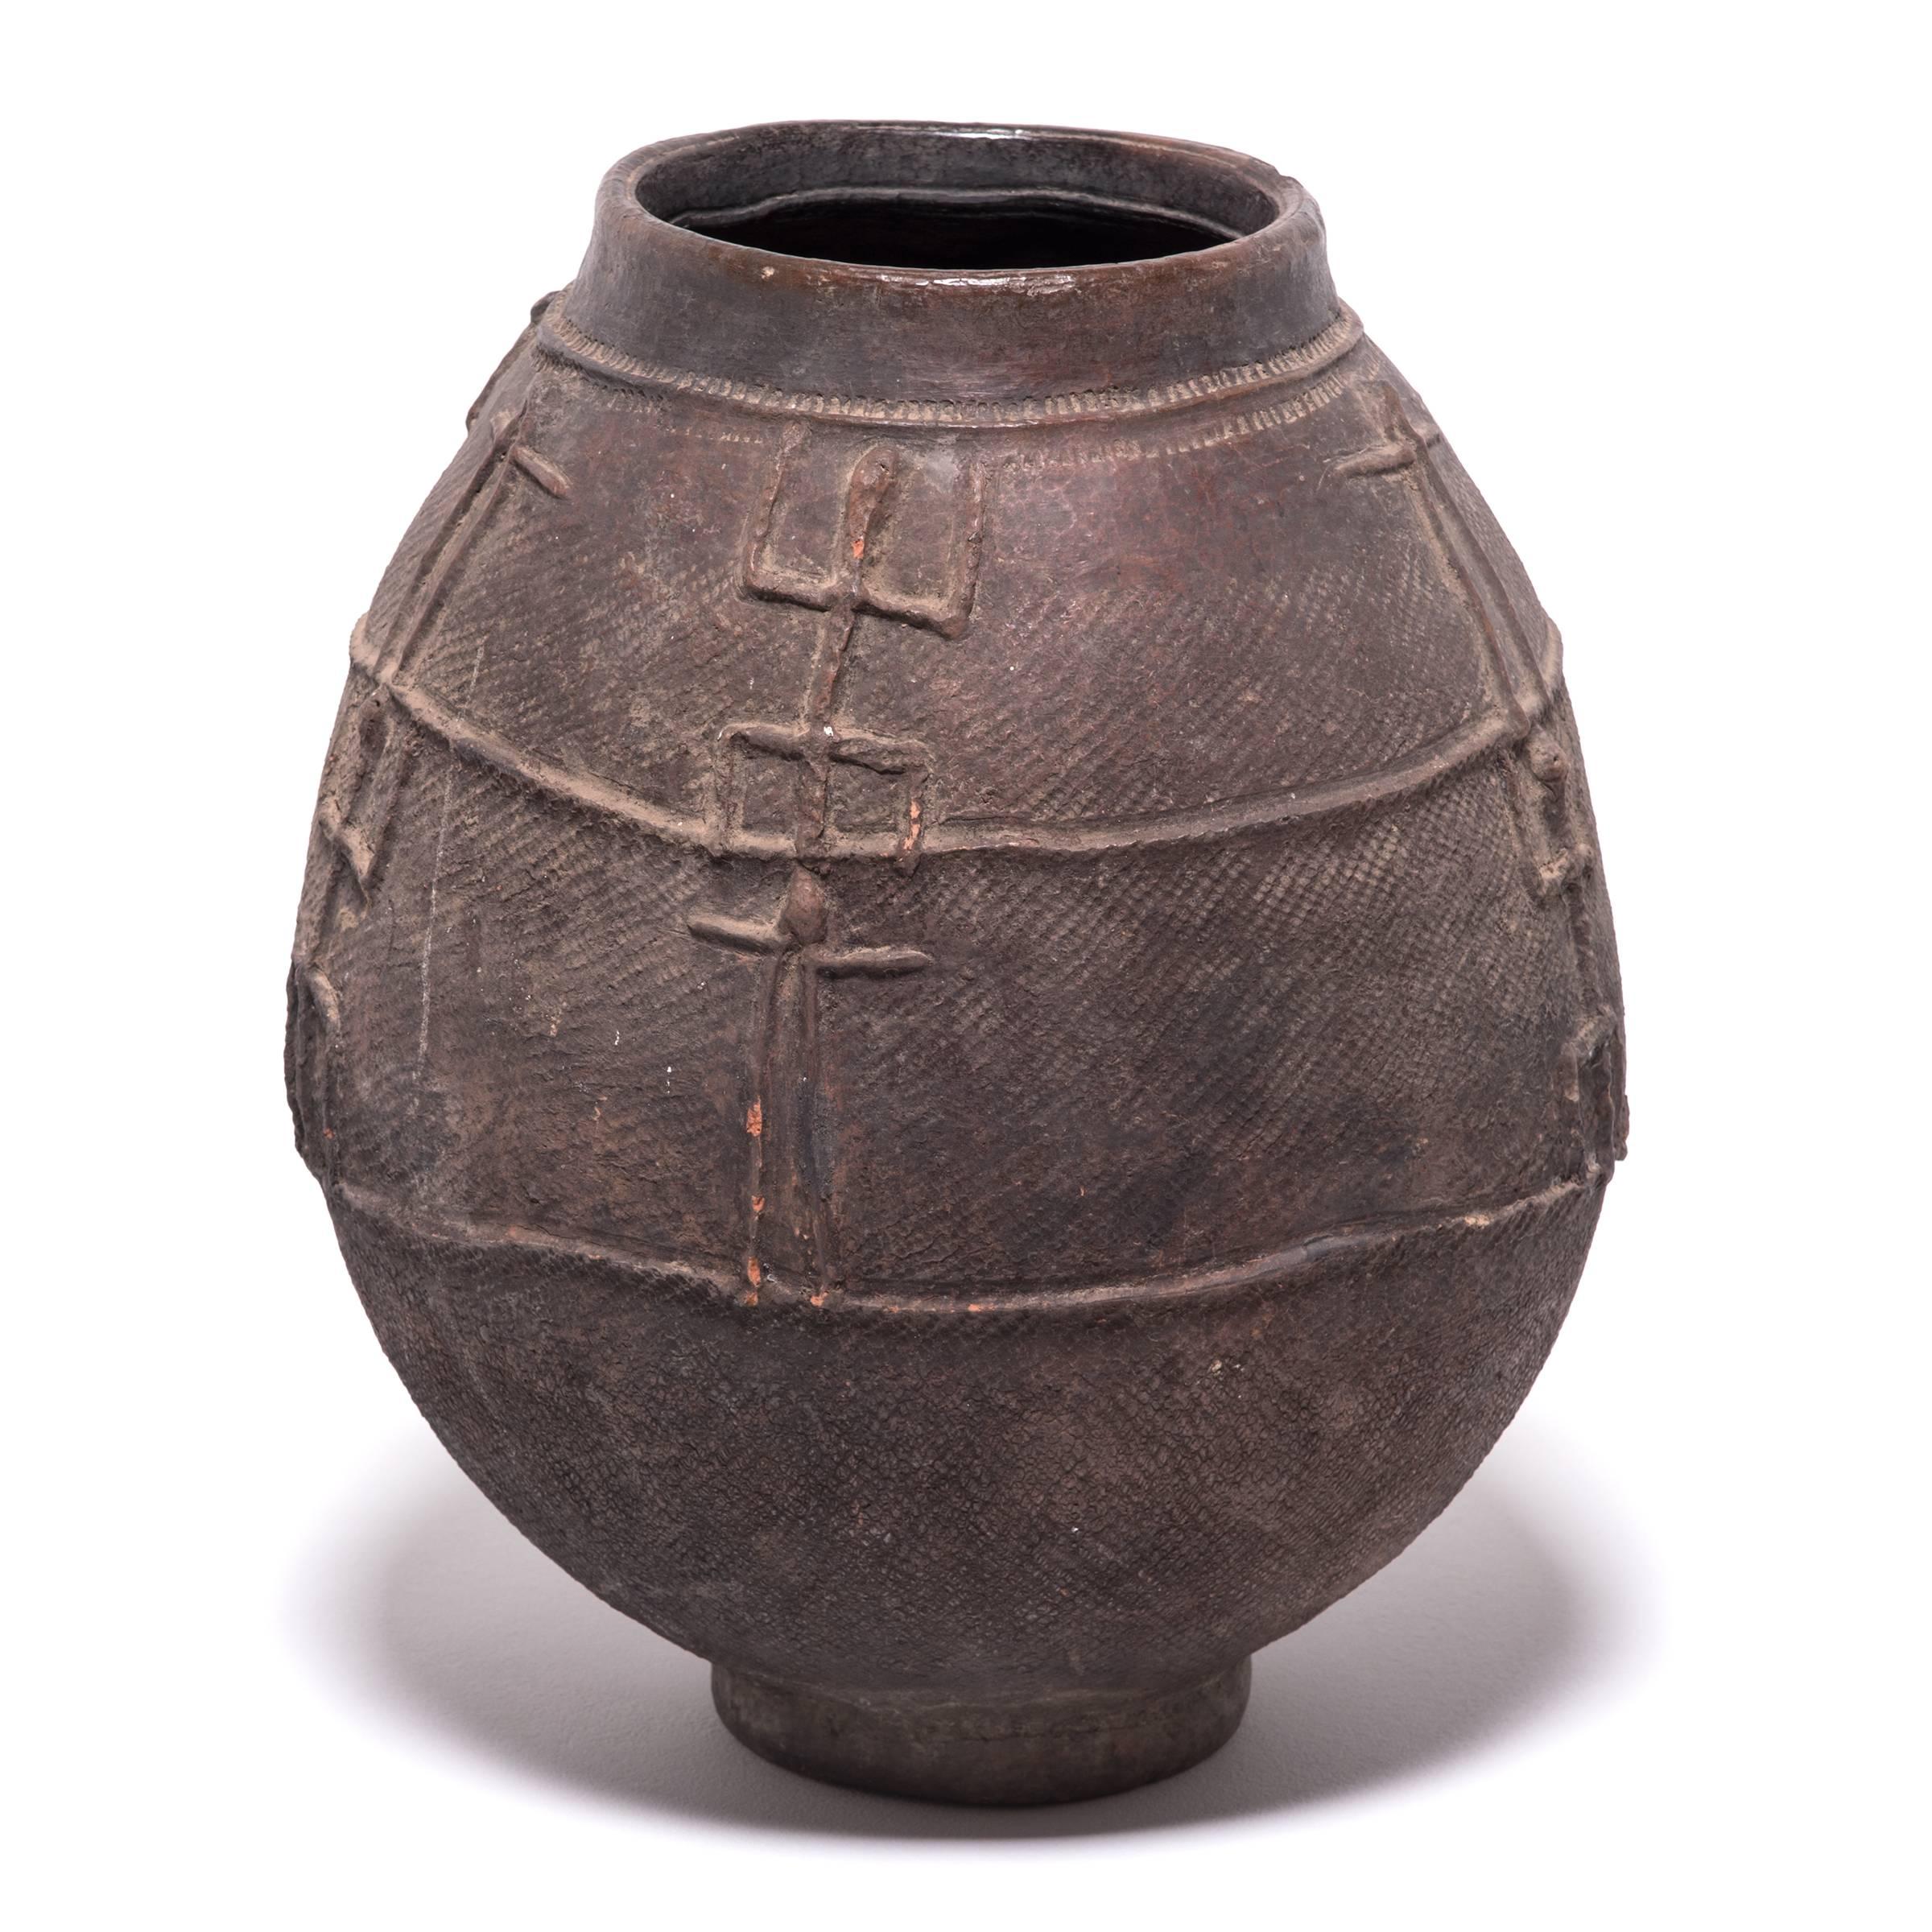 Formed by pounding flattened clay around a convex mold, this oblong footed vessel is a water storage jar known as a jidaga, created by women of the Bambara people of Mali. The body of the wide-mouth jar is patterned with abstract figures of humans